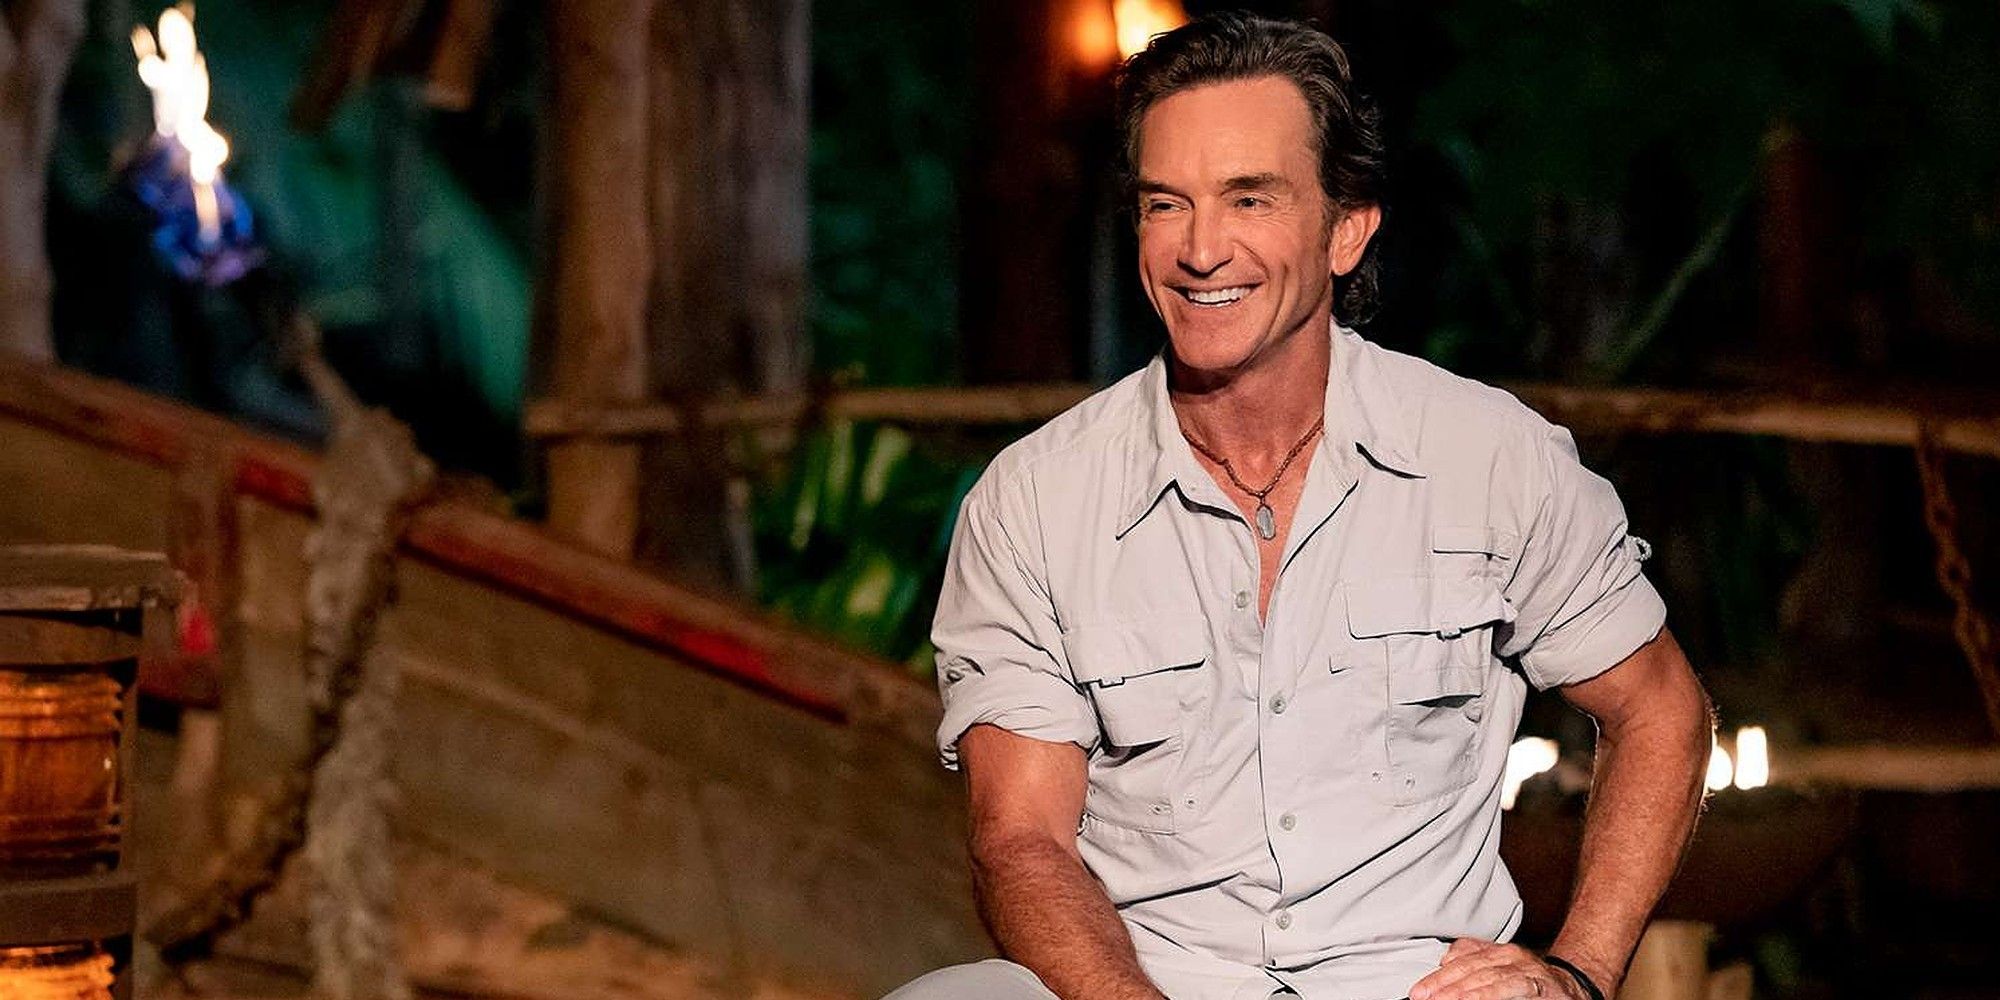 Jeff Probst at Survivor Tribal Council smiling in khaki shirt